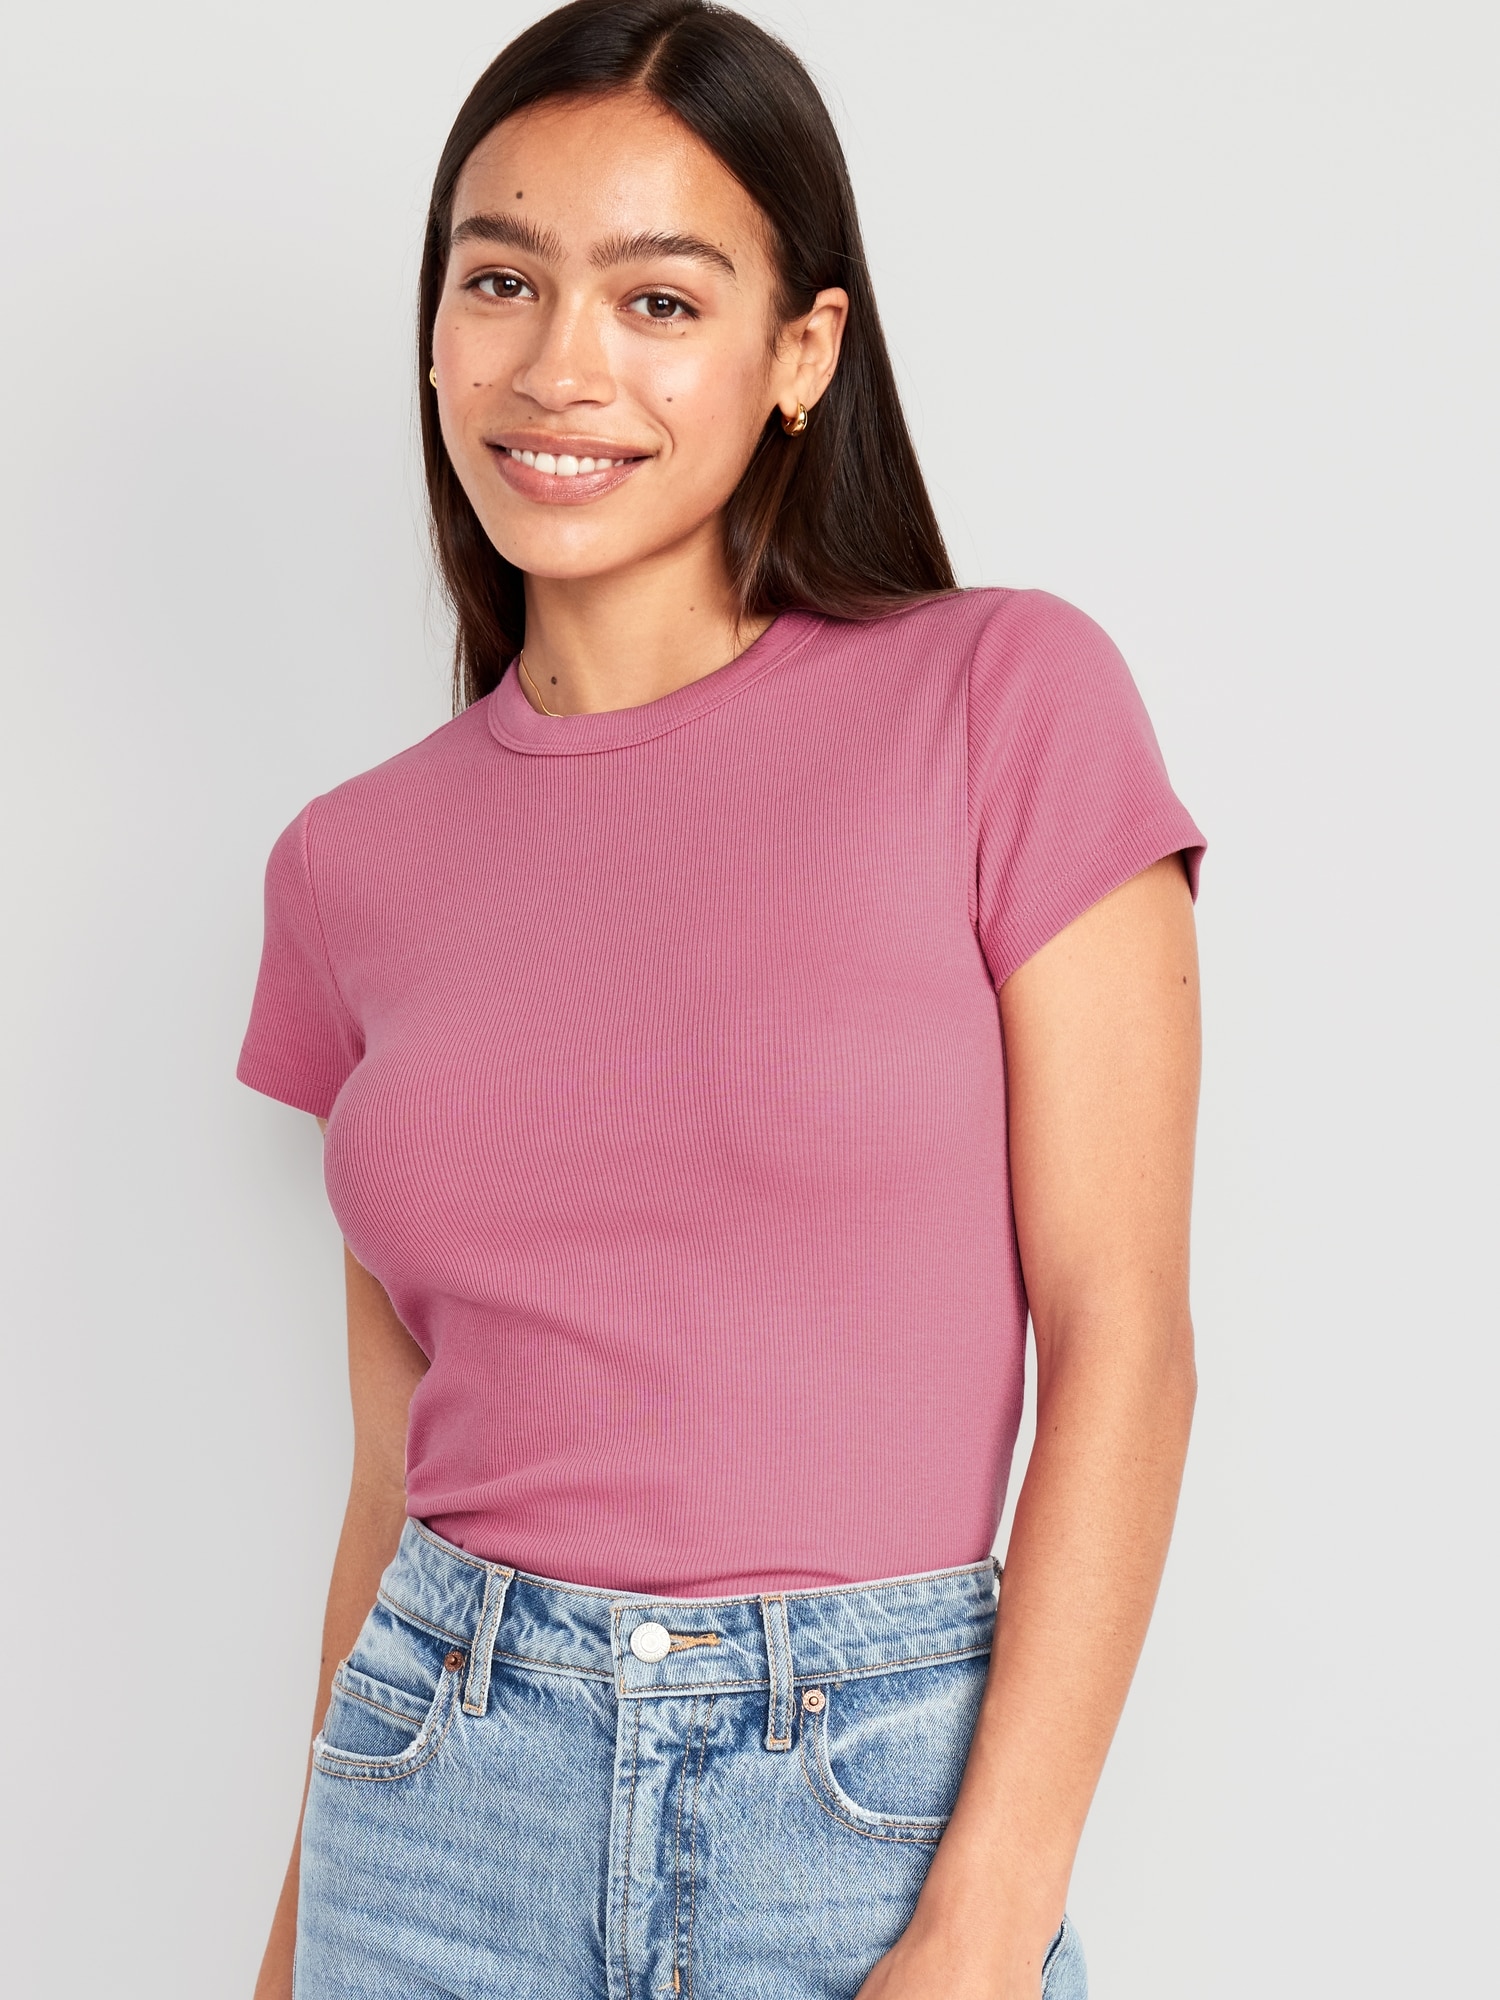 Snug Cropped T-Shirt for Women | Old Navy